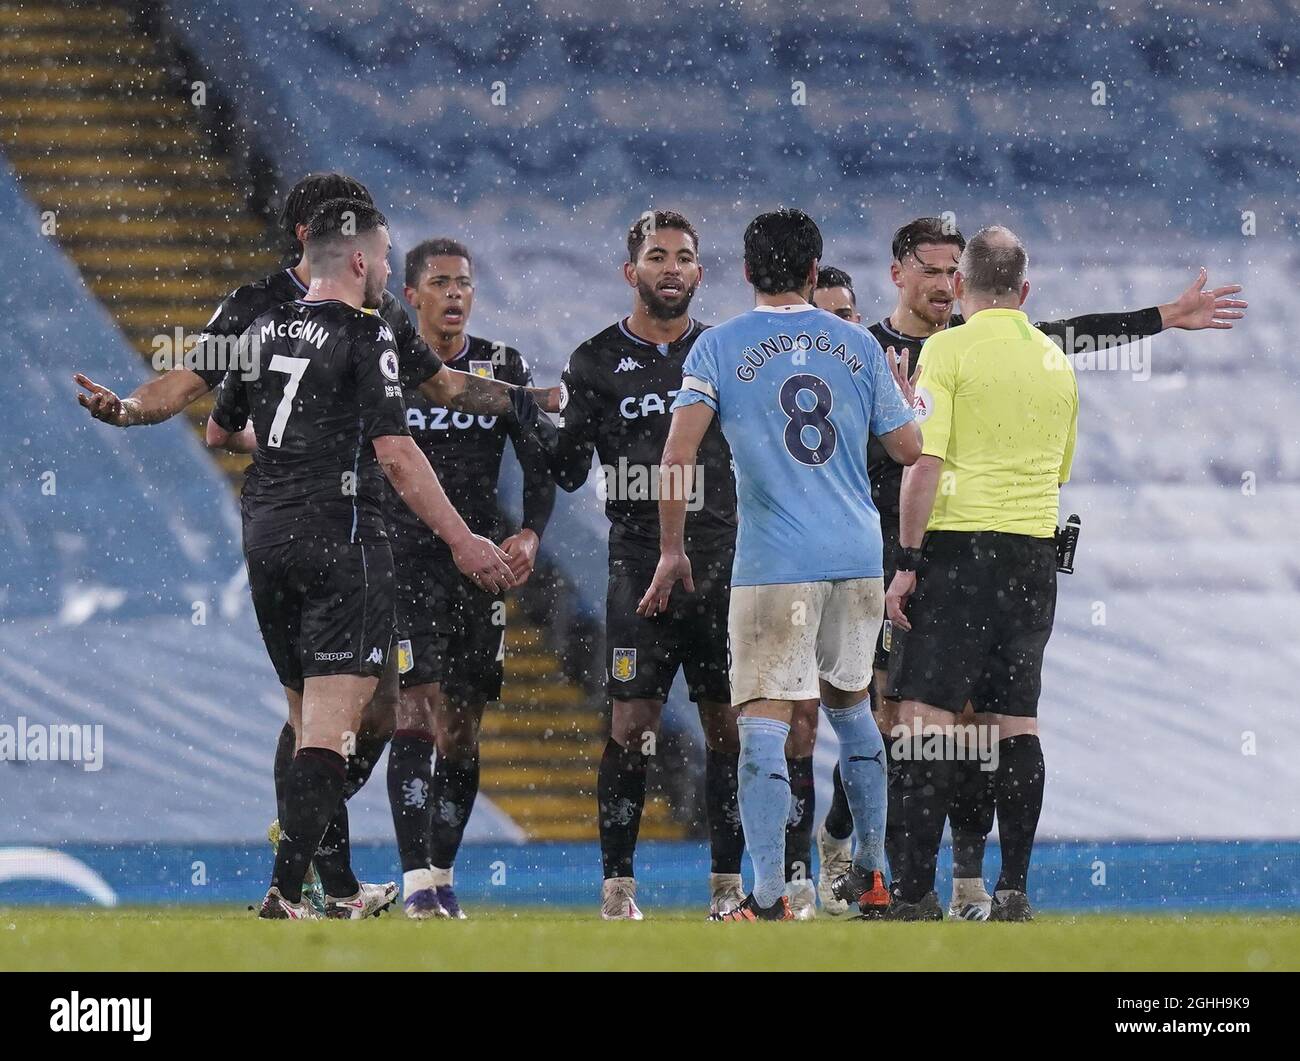 Aston Villa players surround referee Geoff Moss to complain about the goal during the Premier League match at the Etihad Stadium, Manchester. Picture date: 20th January 2021. Picture credit should read: Andrew Yates/Sportimage via PA Images Stock Photo